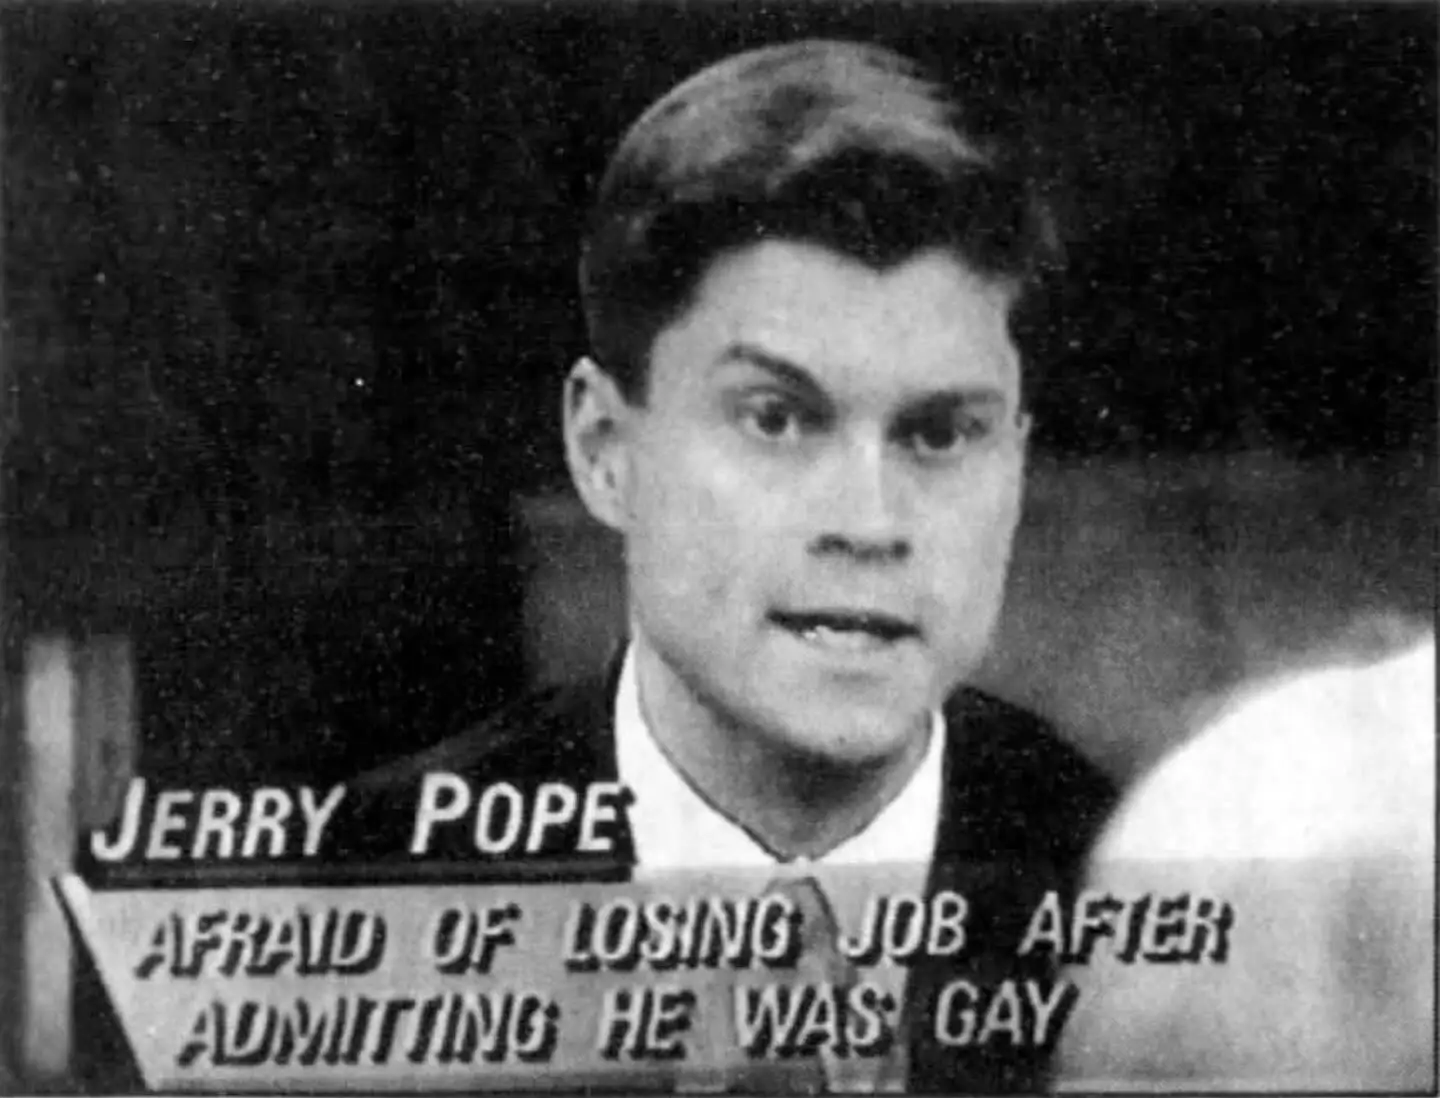 A black and white still shot of a TV show showing Jerry Pope, a white man with dark hair wearing a suit and tie.